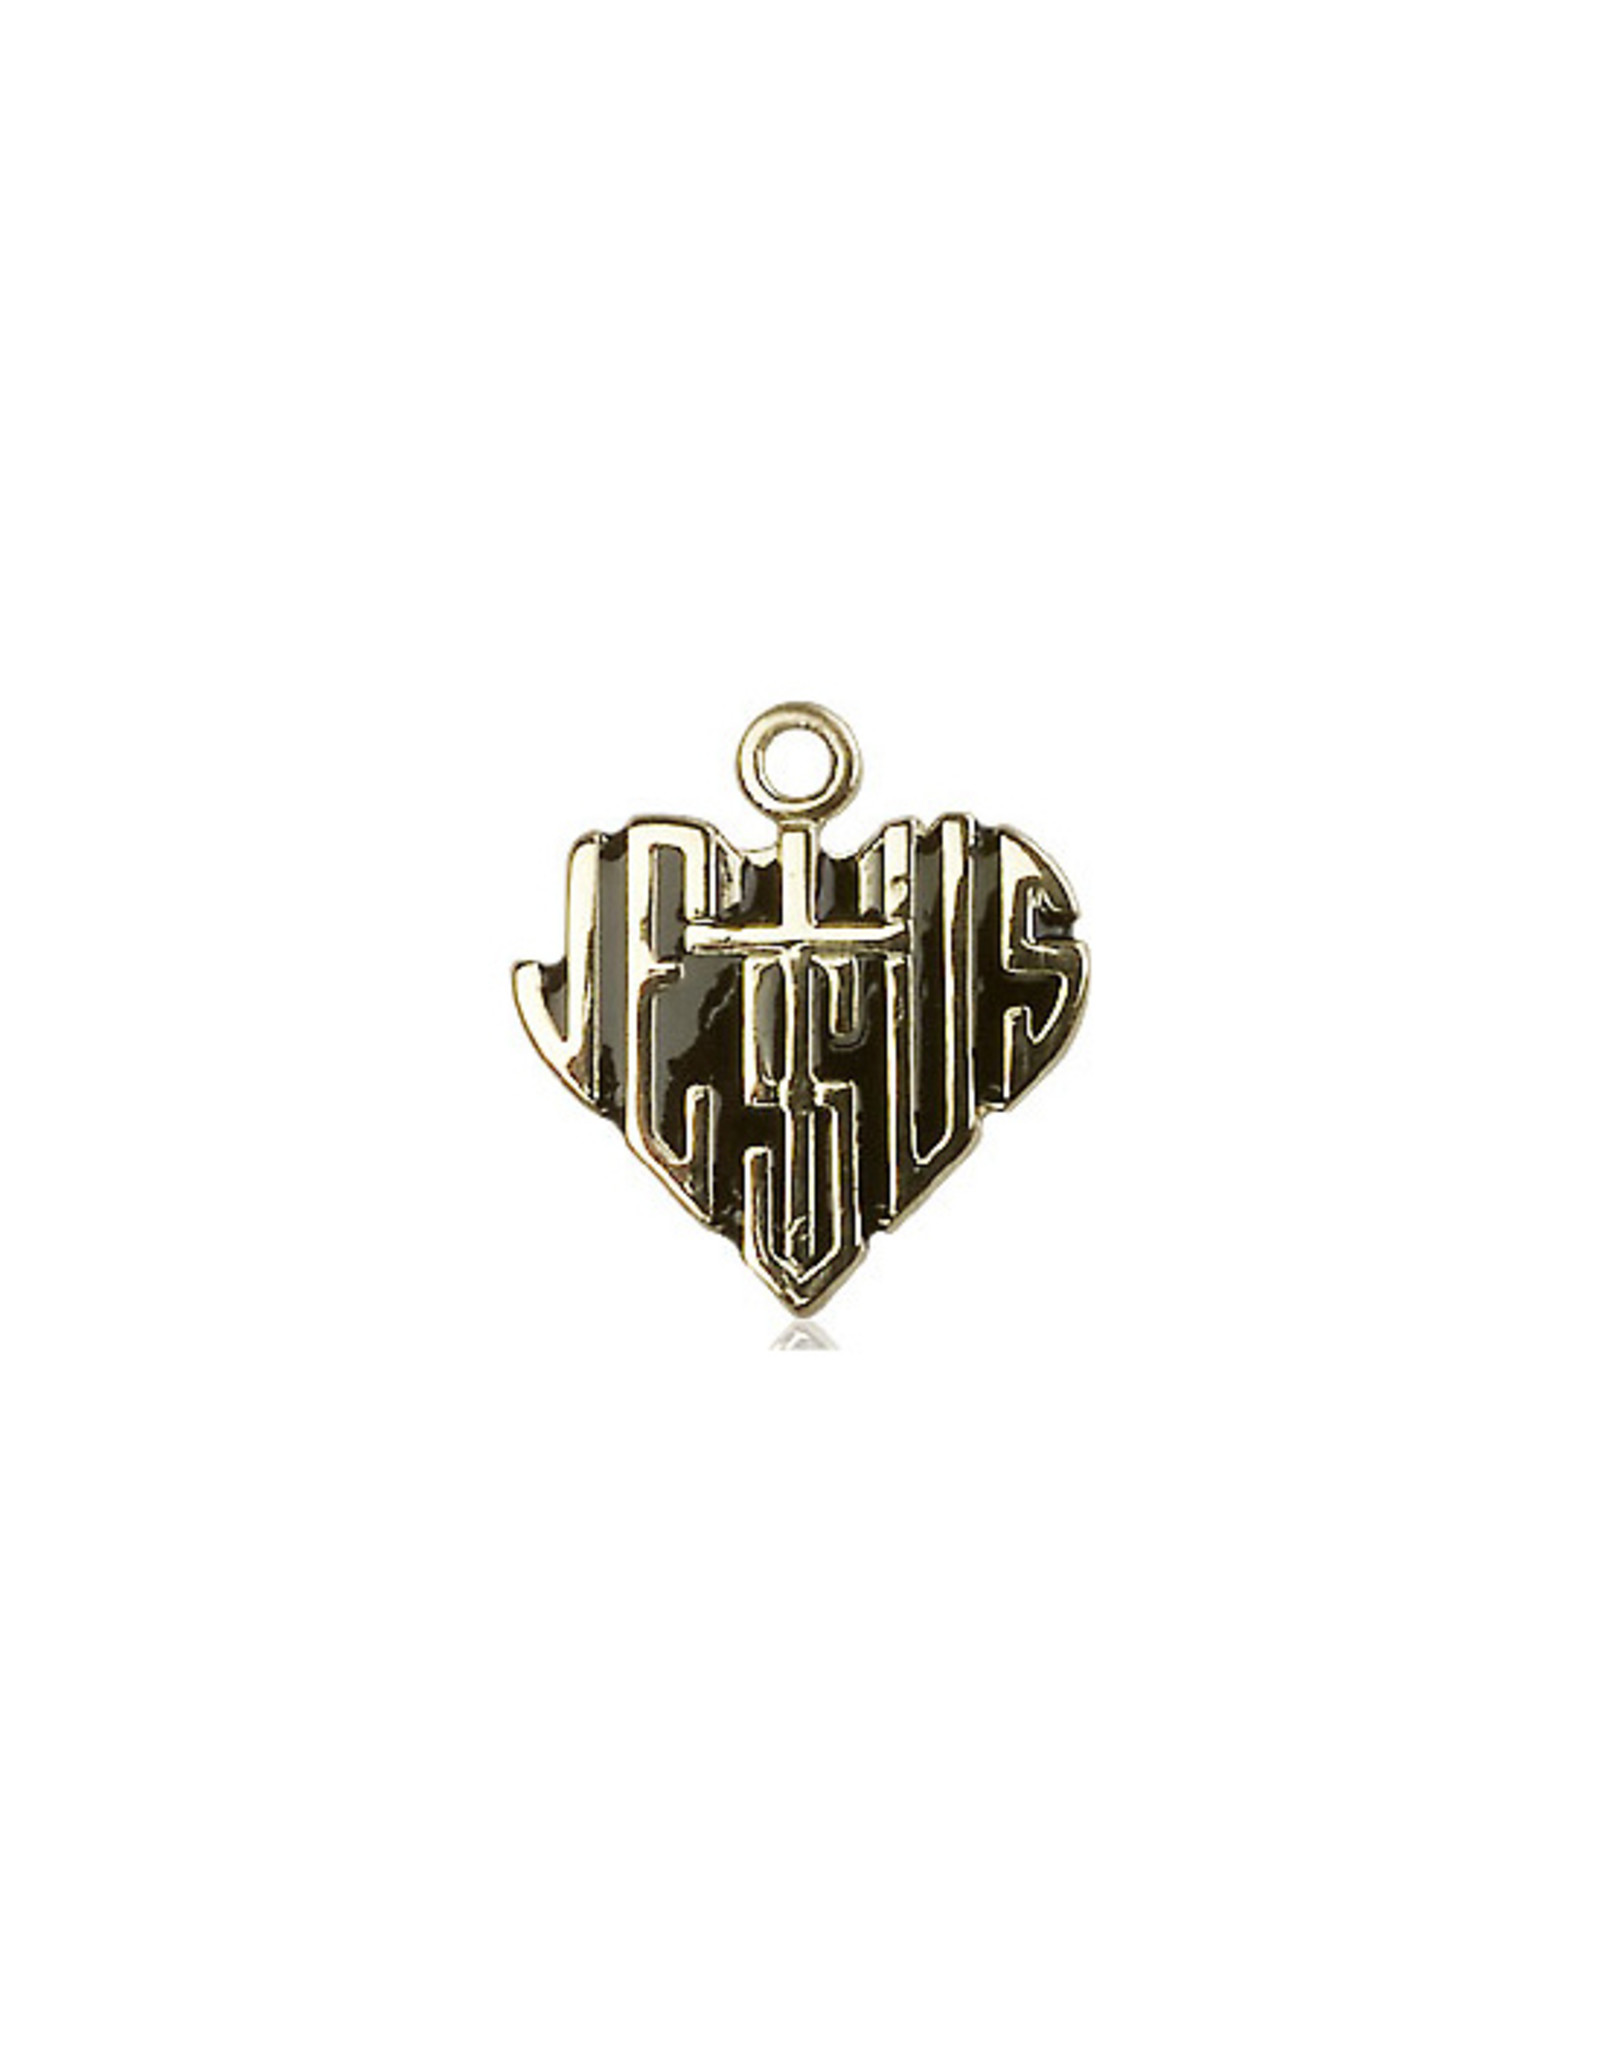 Bliss Jesus Heart with Cross Medal, Gold Filled